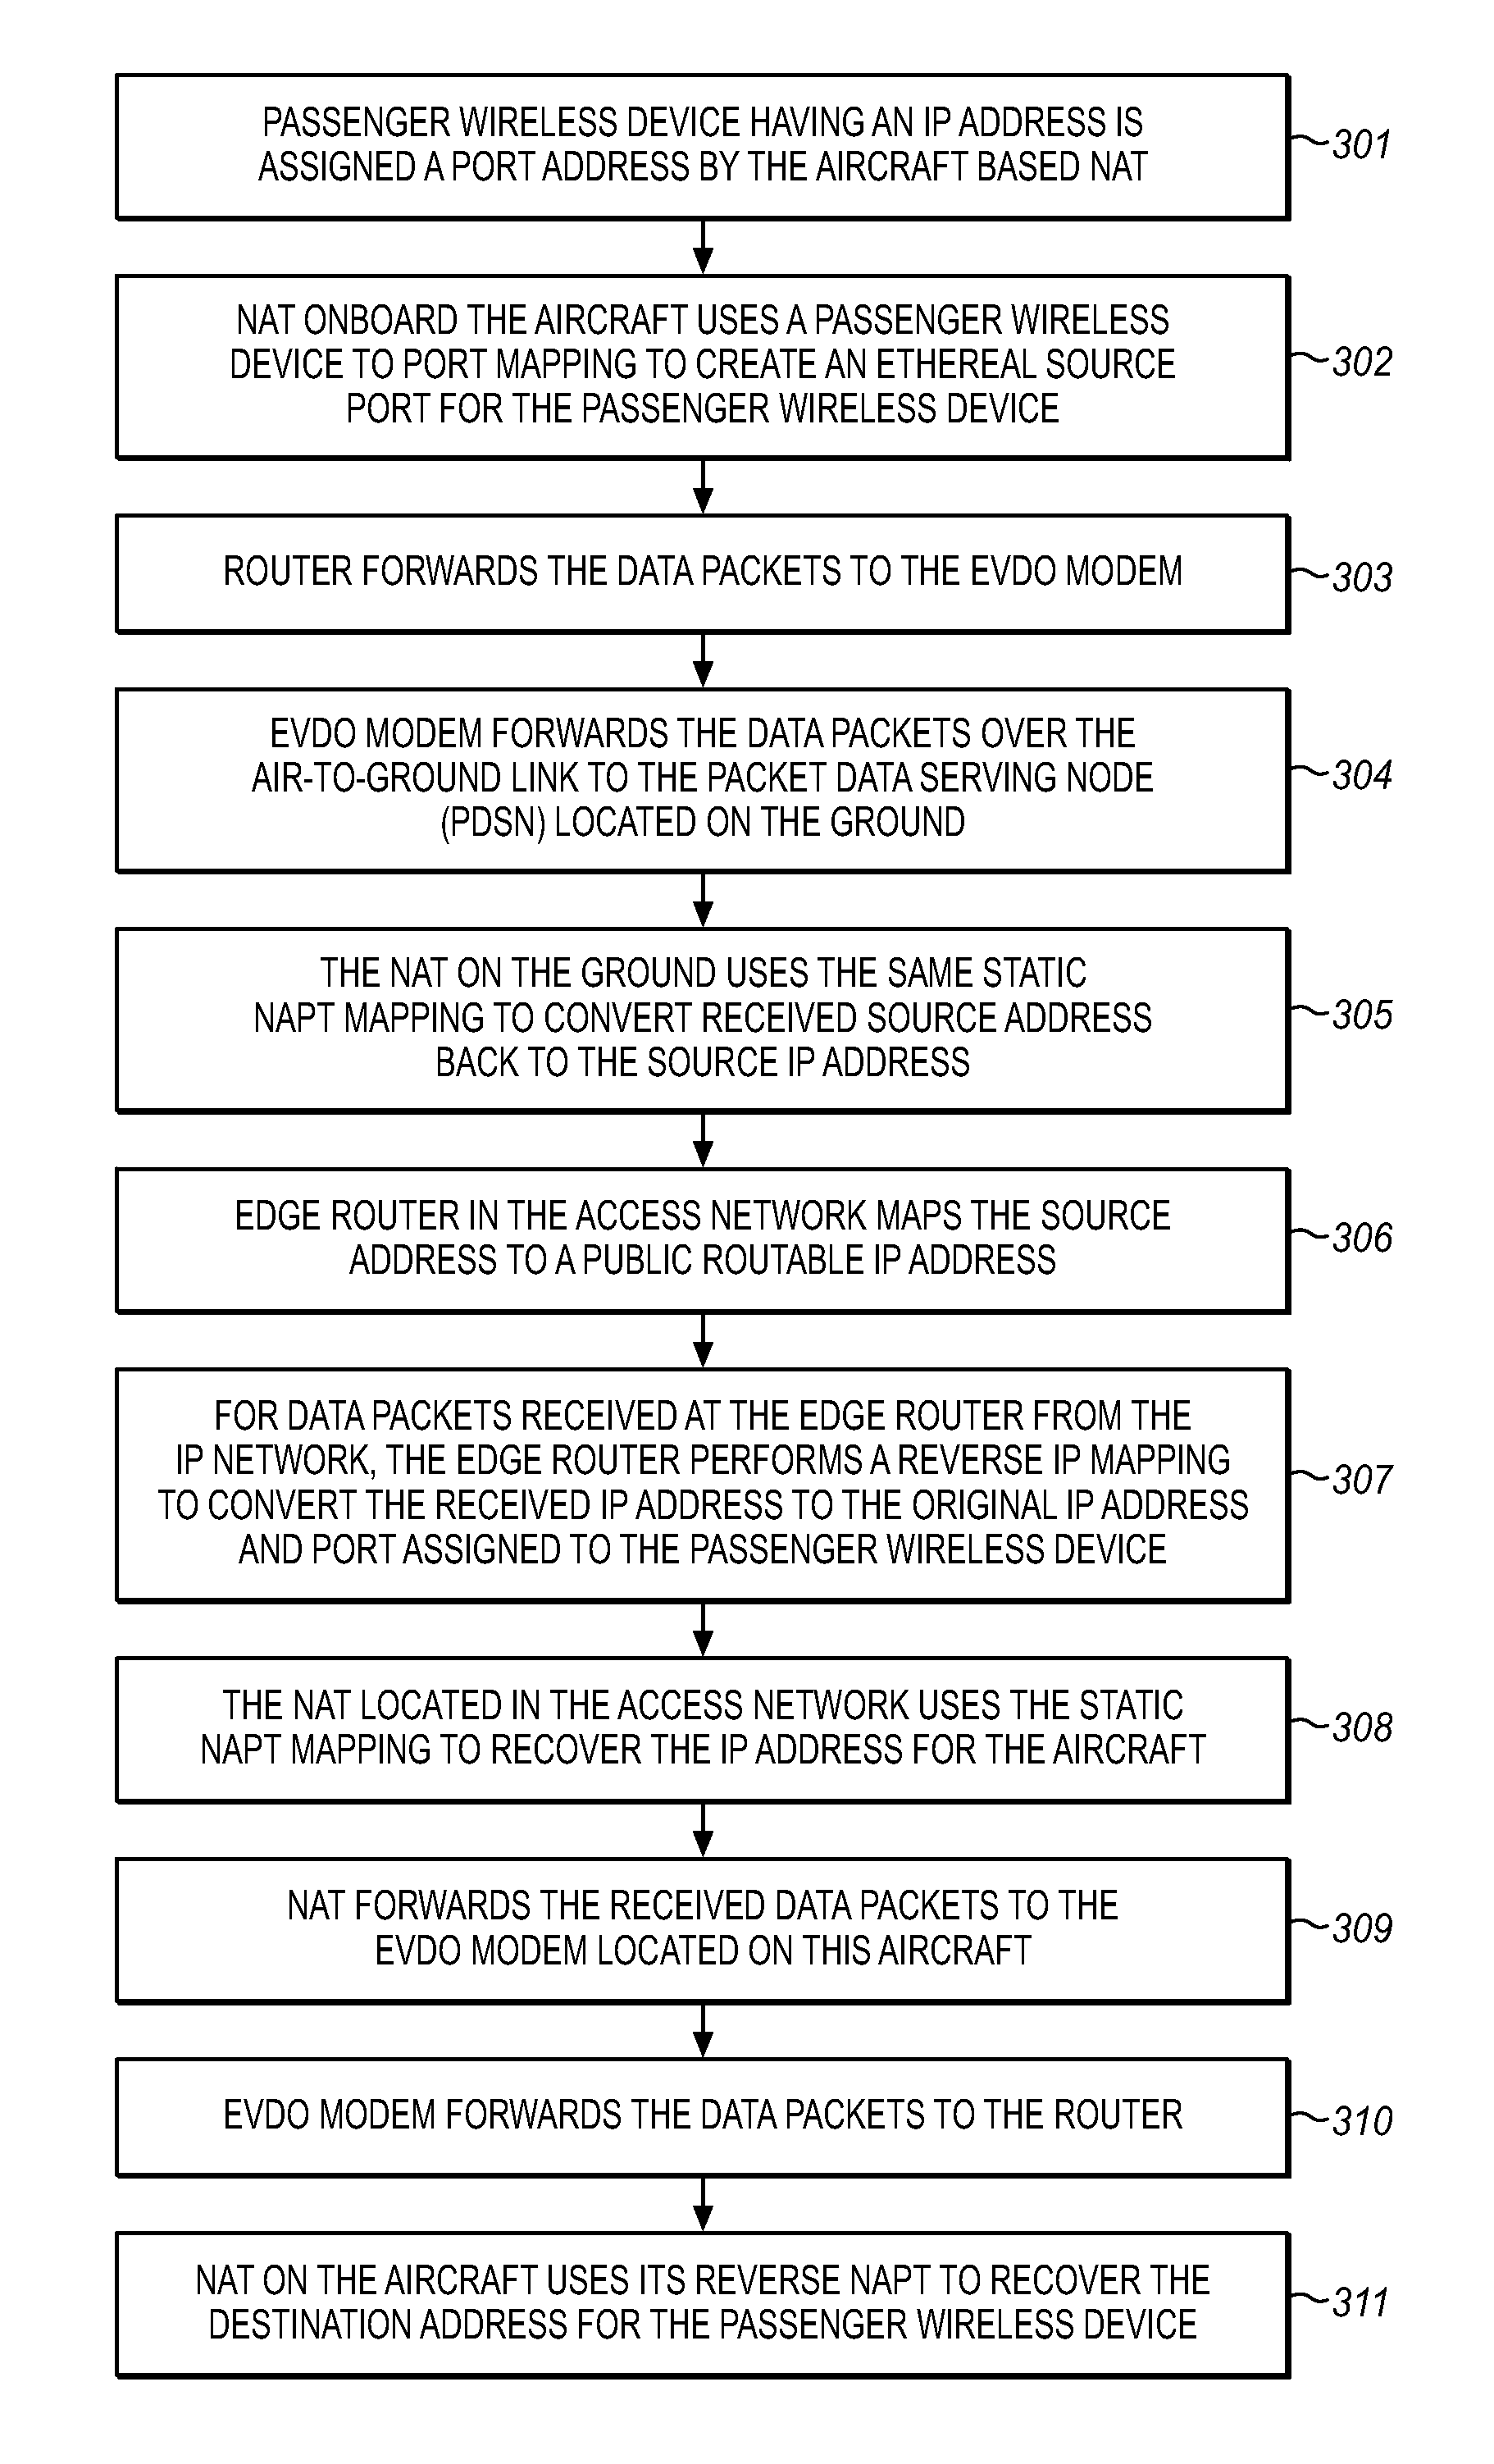 Differentiated services code point mirroring for wireless communications